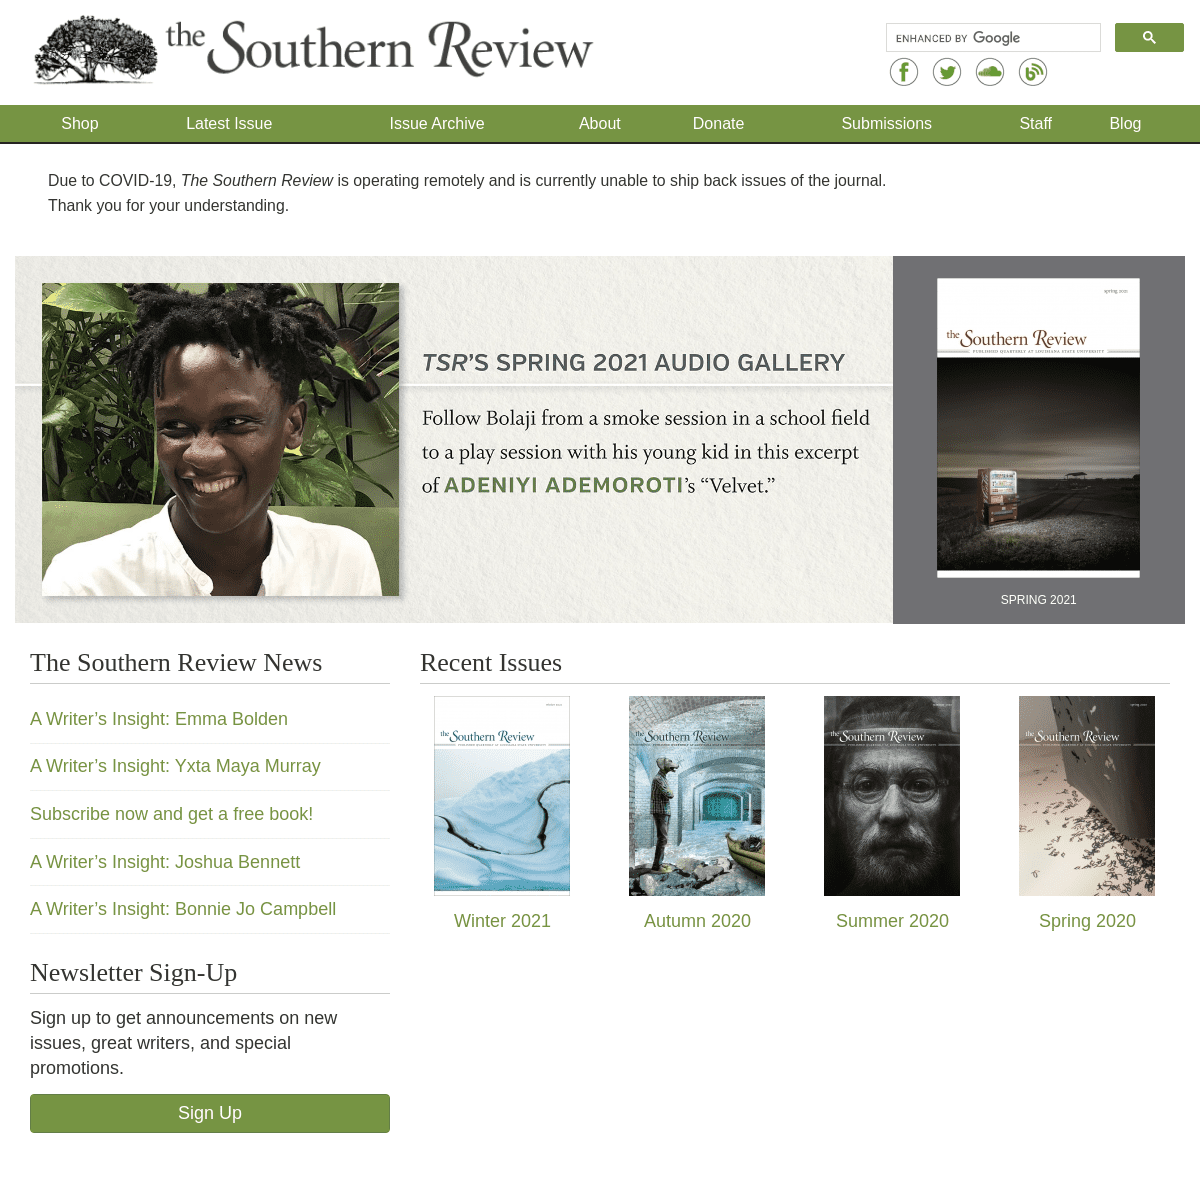 A complete backup of https://thesouthernreview.org